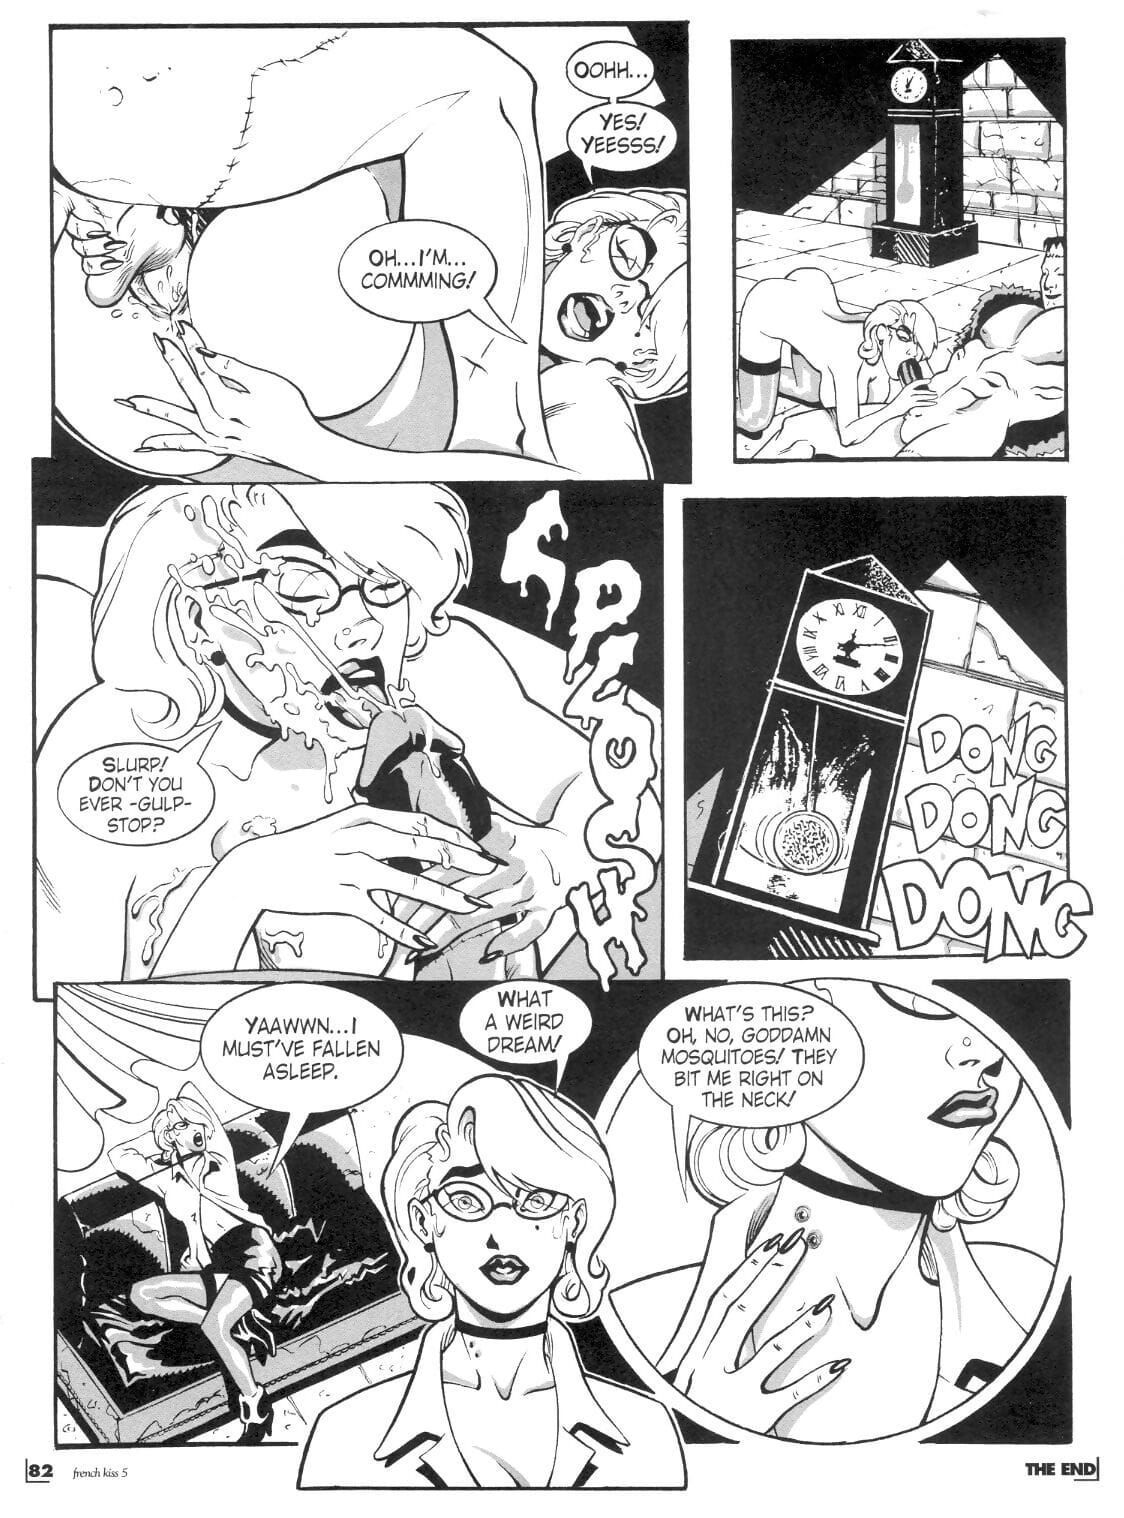 French Kiss Comix 05 - part 3 page 1